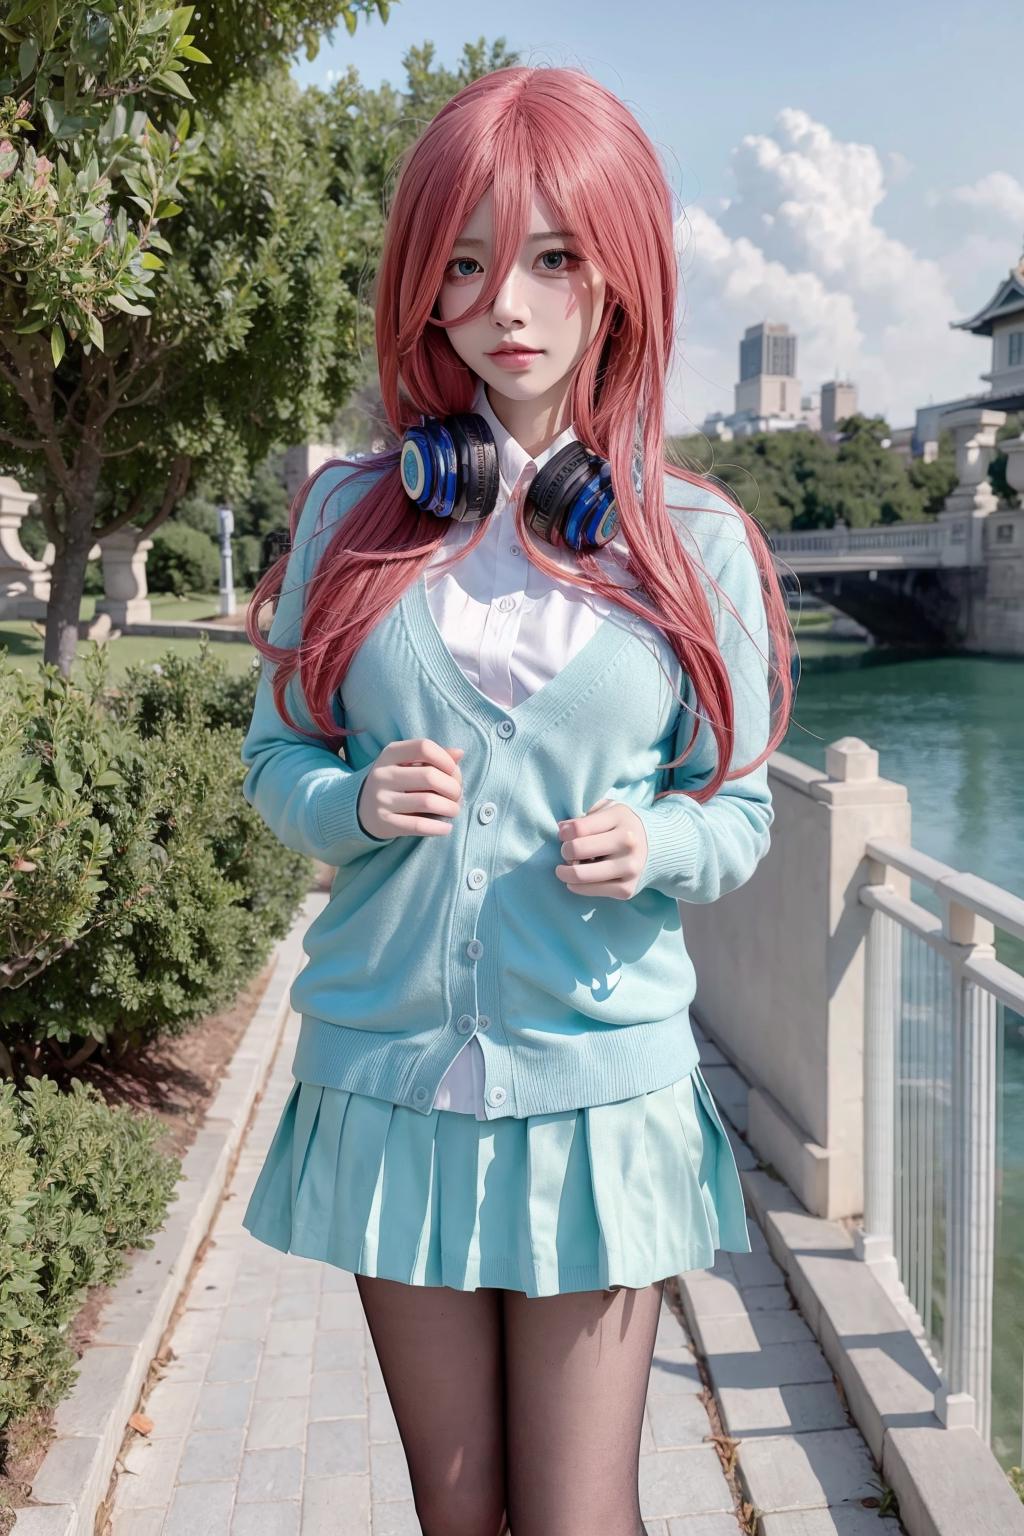 Nakano Miku in The Quintessential Quintuplets | Realistic LORA image by jappww